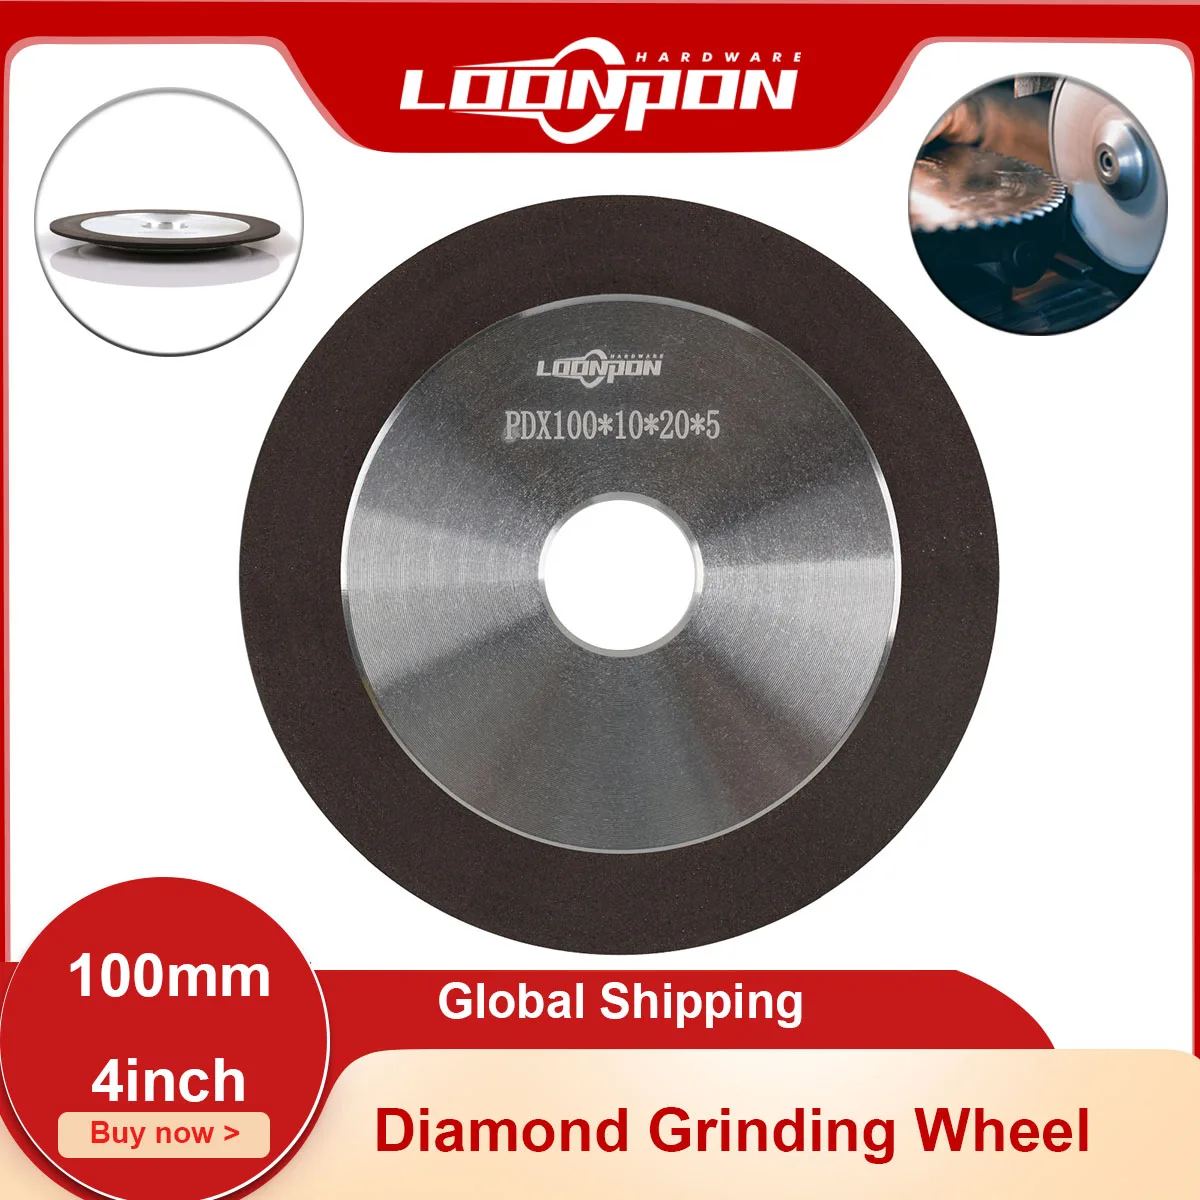 100mm/4inch Diamond Grinding Wheel Grinding Circle Grit 150 for Tungsten Steel Milling Cutter Tool Sharpener Grinder 1pc 50mm diamond grinding wheel 180 grits grinder sharpener trimming rotary tool for grinding machine woodworking power tool